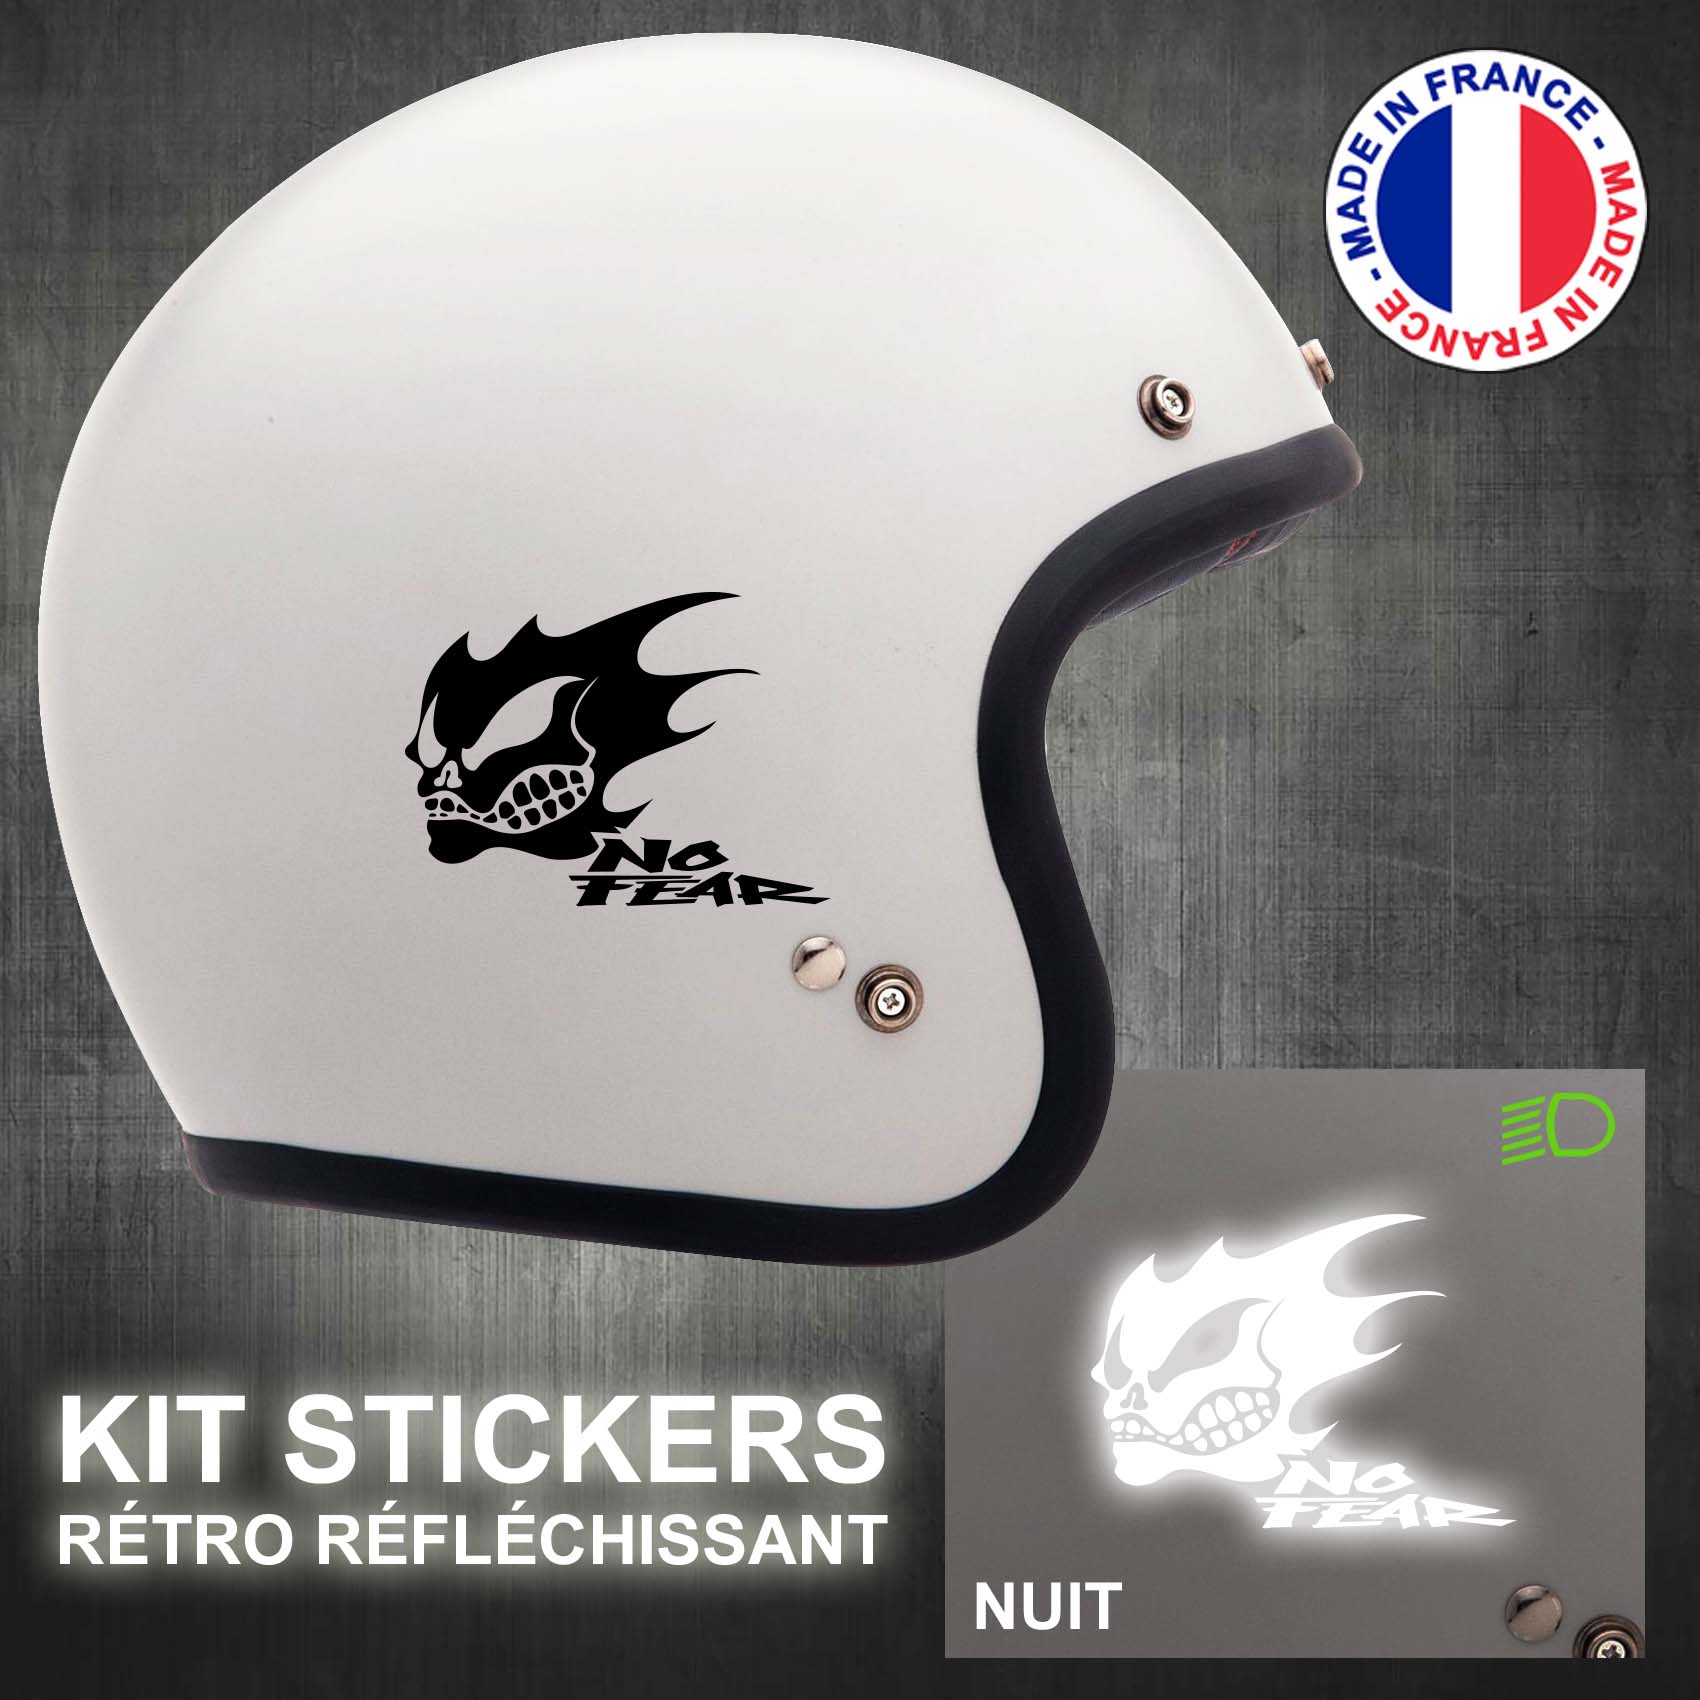 stickers-casque-moto-no-fear-ref4-retro-reflechissant-autocollant-moto-velo-tuning-racing-route-sticker-casques-adhesif-scooter-nuit-securite-decals-personnalise-personnalisable-min